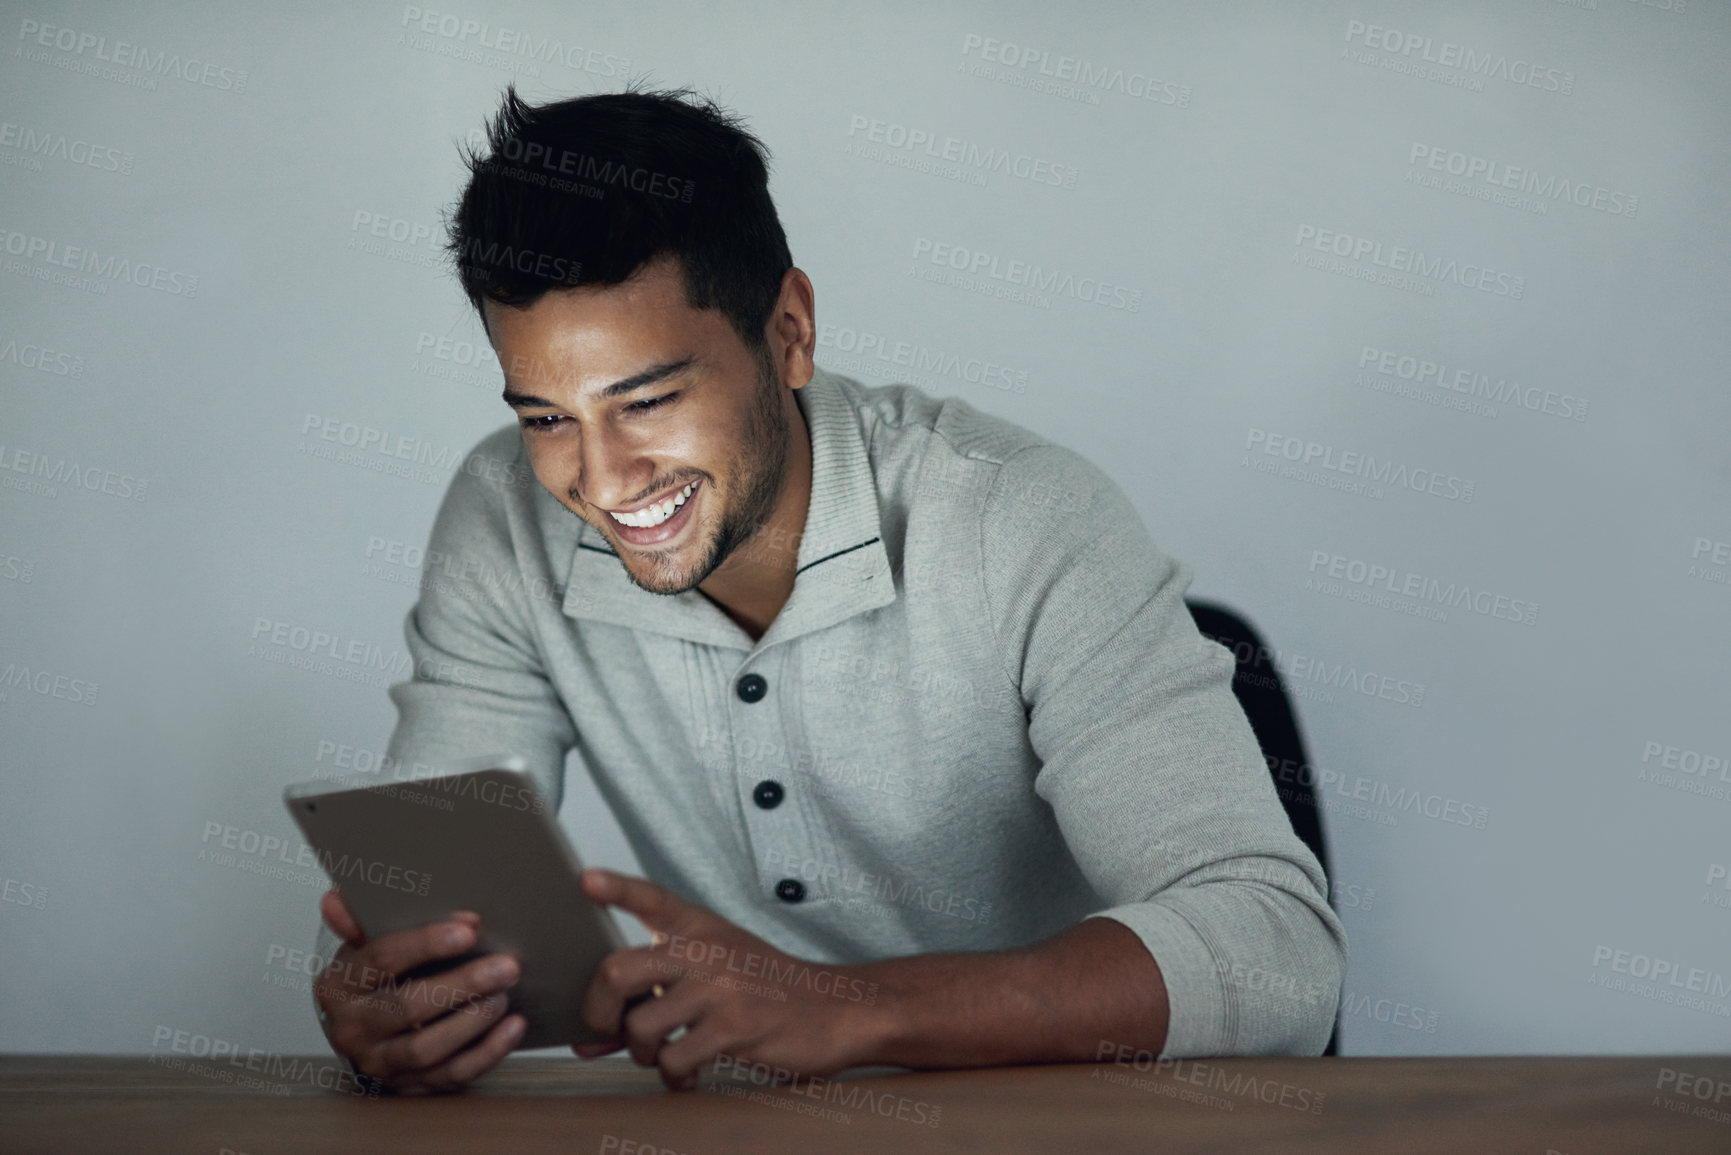 Buy stock photo Cropped shot of a young man using his tablet at night